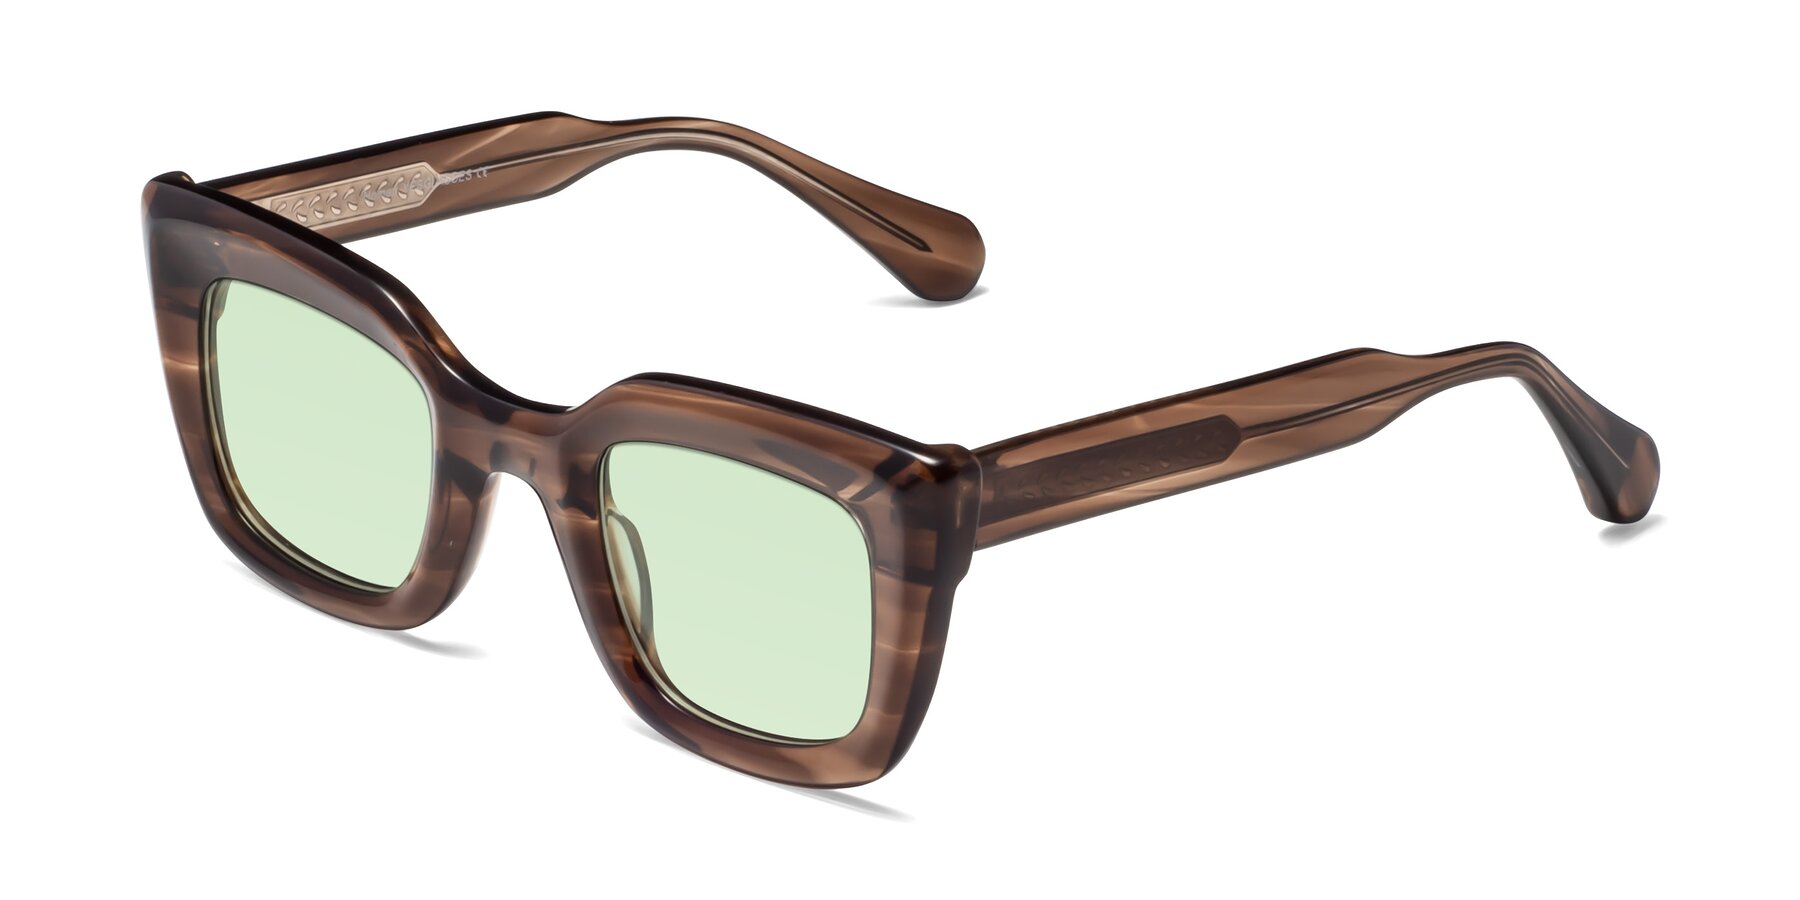 Angle of Homan in Chocolate with Light Green Tinted Lenses